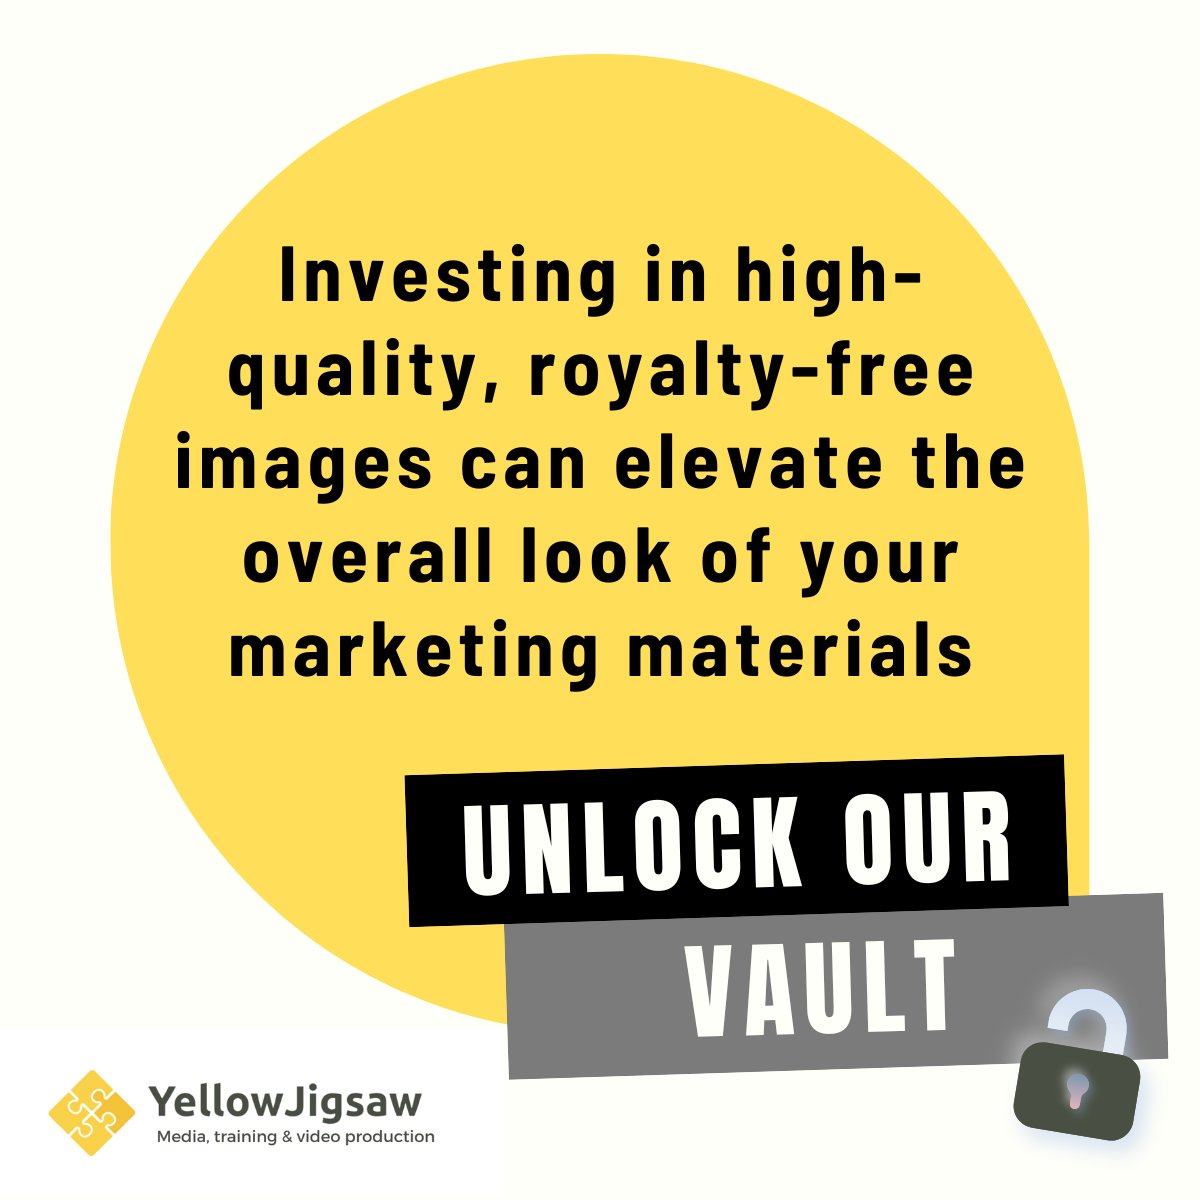 Do you need to brand on a budget? Take advantage of DIY design tools to create slick marketing material. Ready to unleash your inner media star? Access our free vault of guides on our website and watch your media confidence soar! 💫 yellowjigsaw.co.uk/vault/